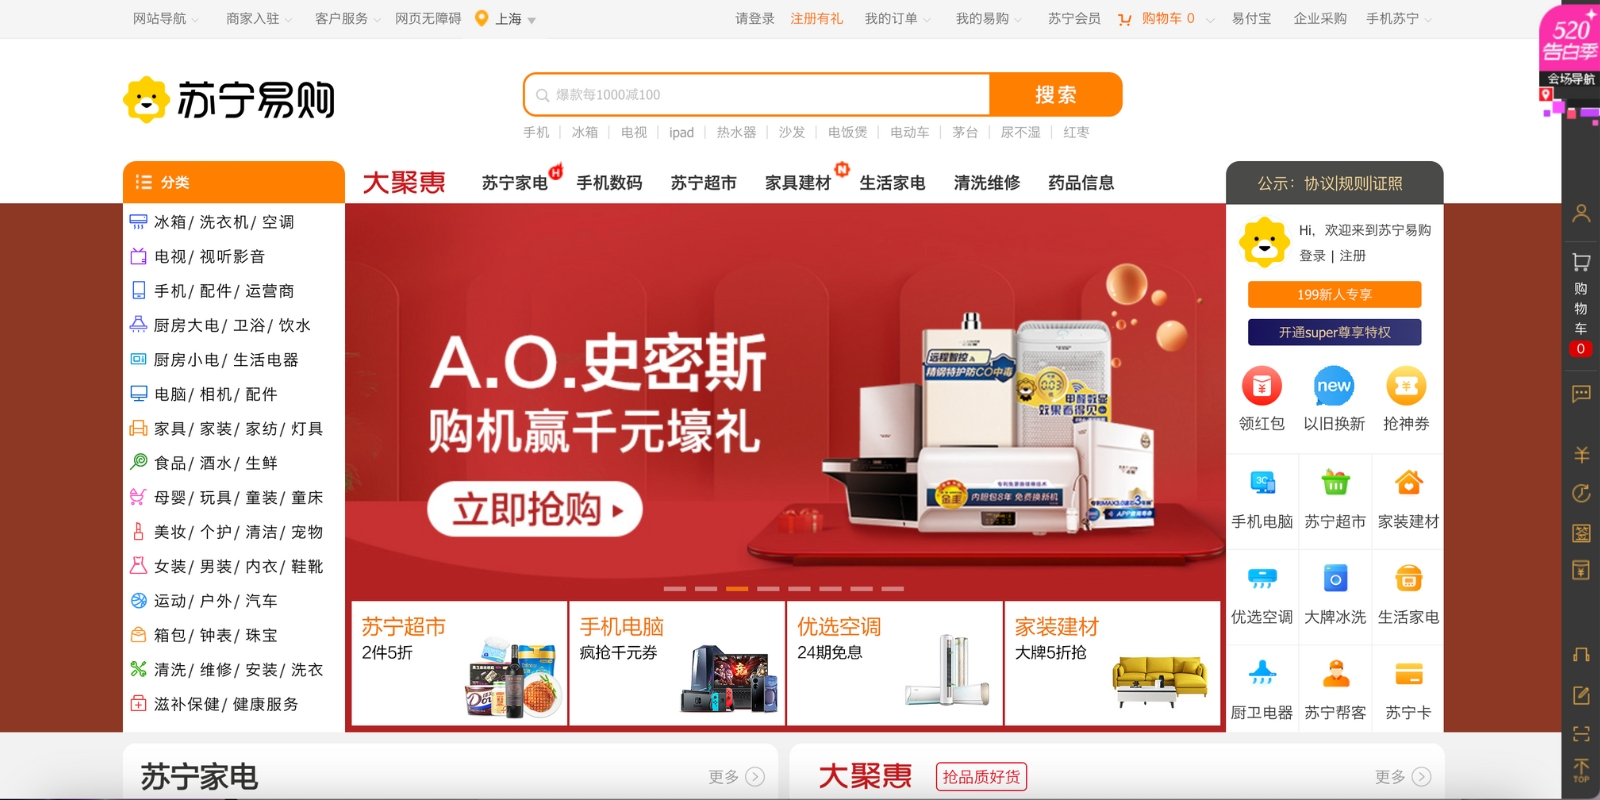 Suning ecommerce website main page view